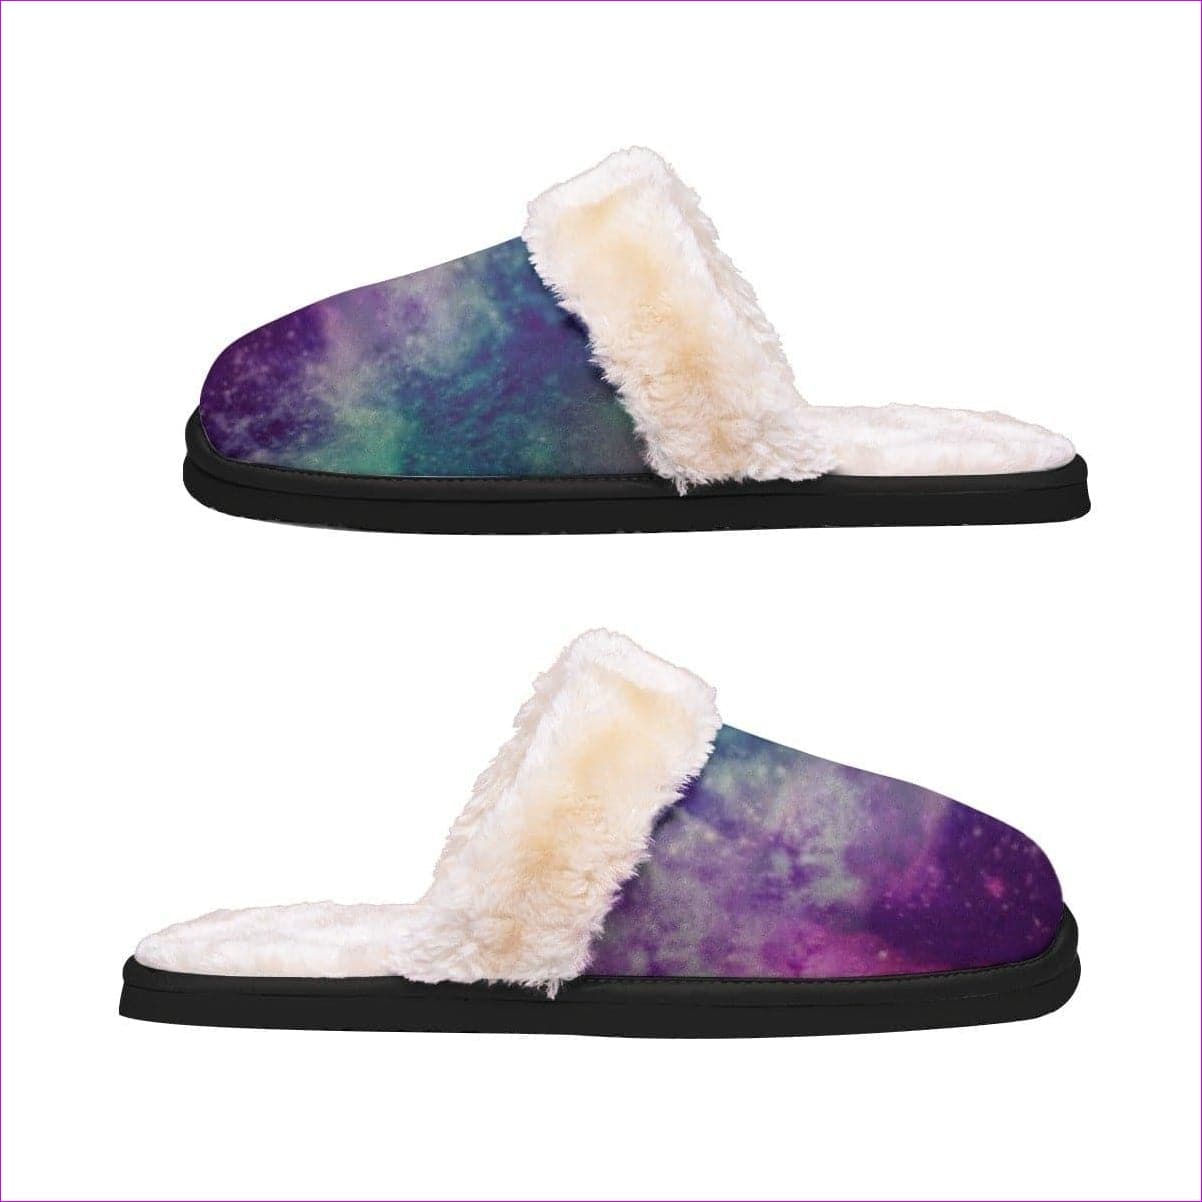 multi-colored - Galaxy Kids Home Plush Slippers - kids slippers at TFC&H Co.